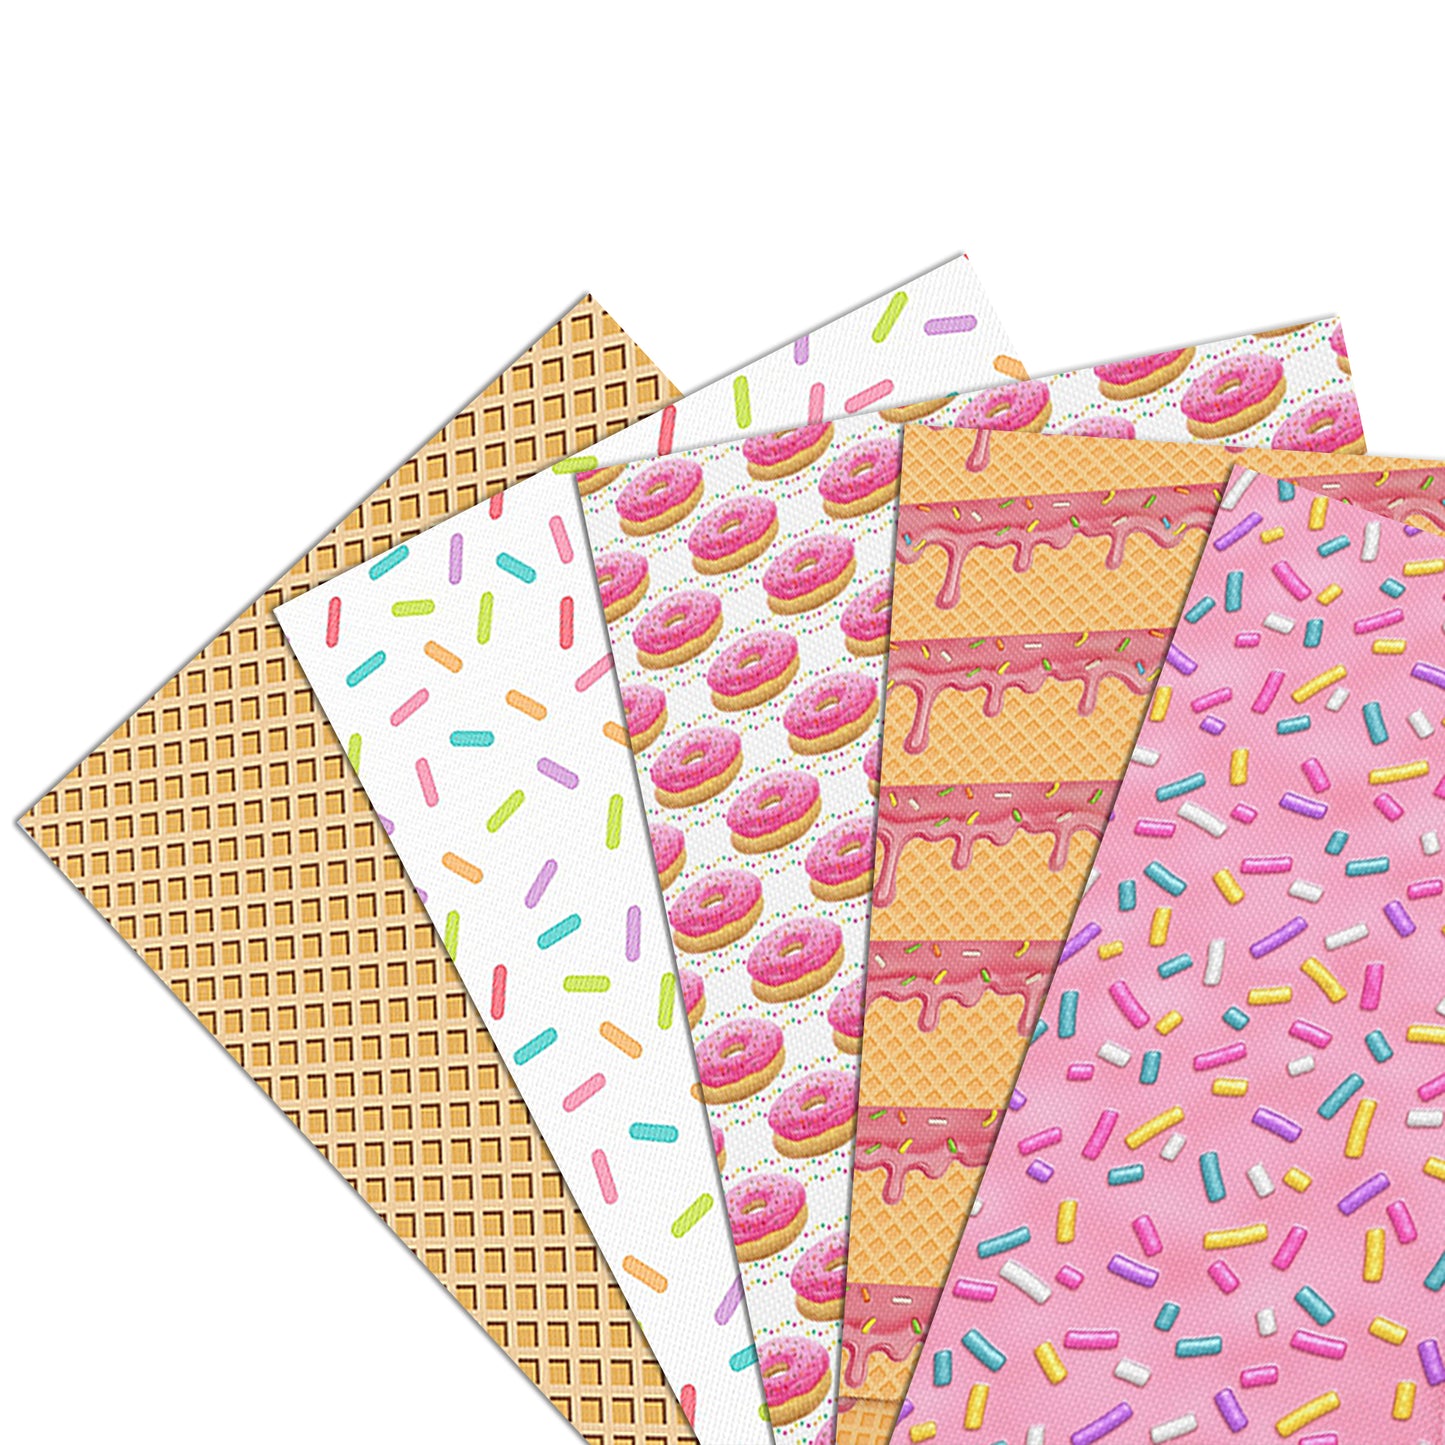 Food Printed Faux Leather Sets Wholesale